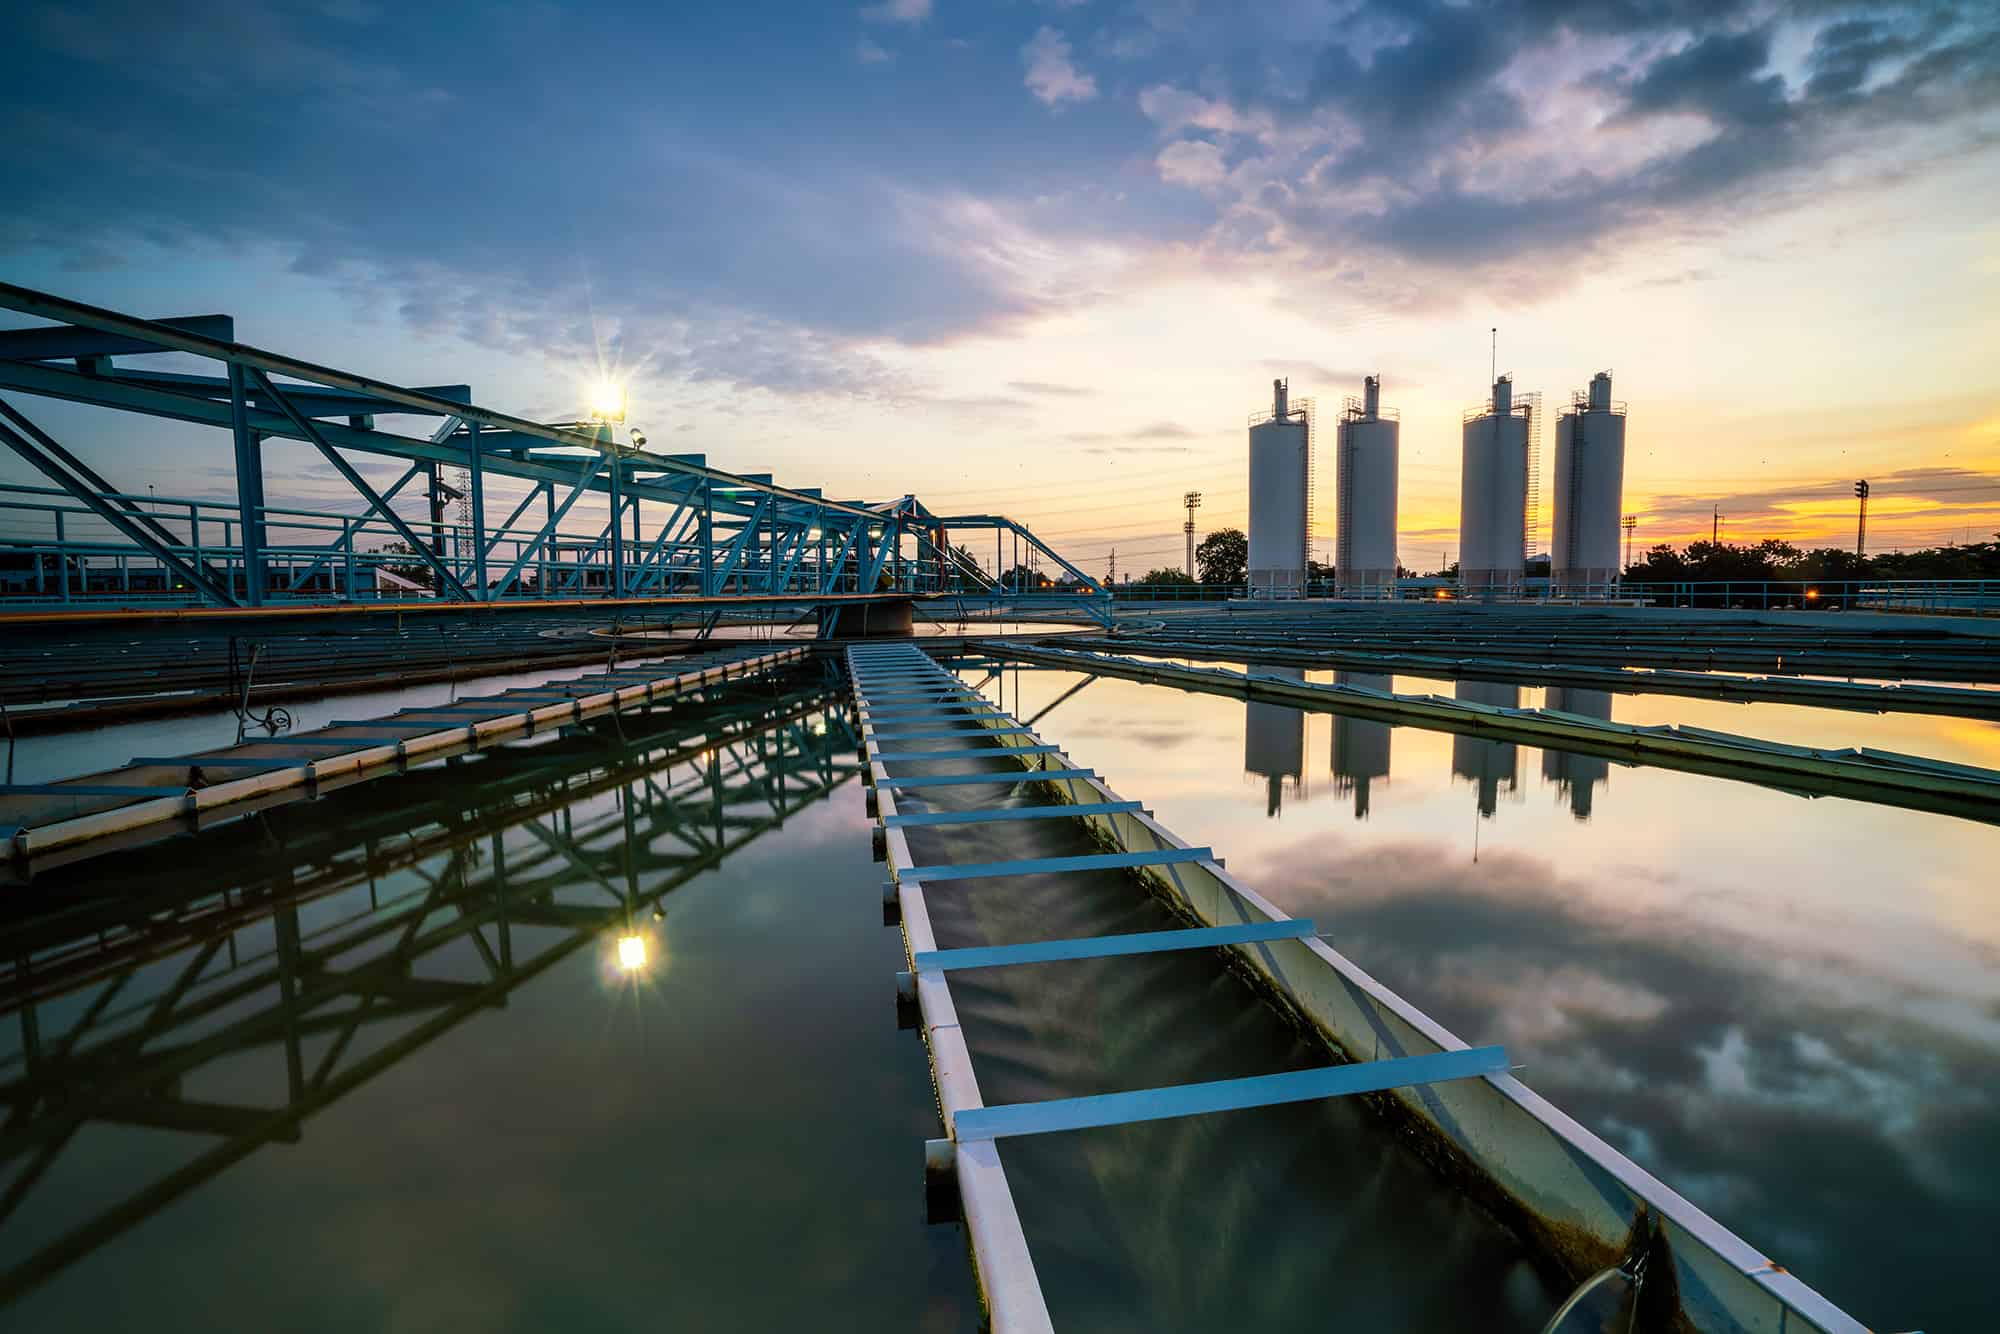 A water treatment plant at sunset with reflection in the water and a dramatic sky.